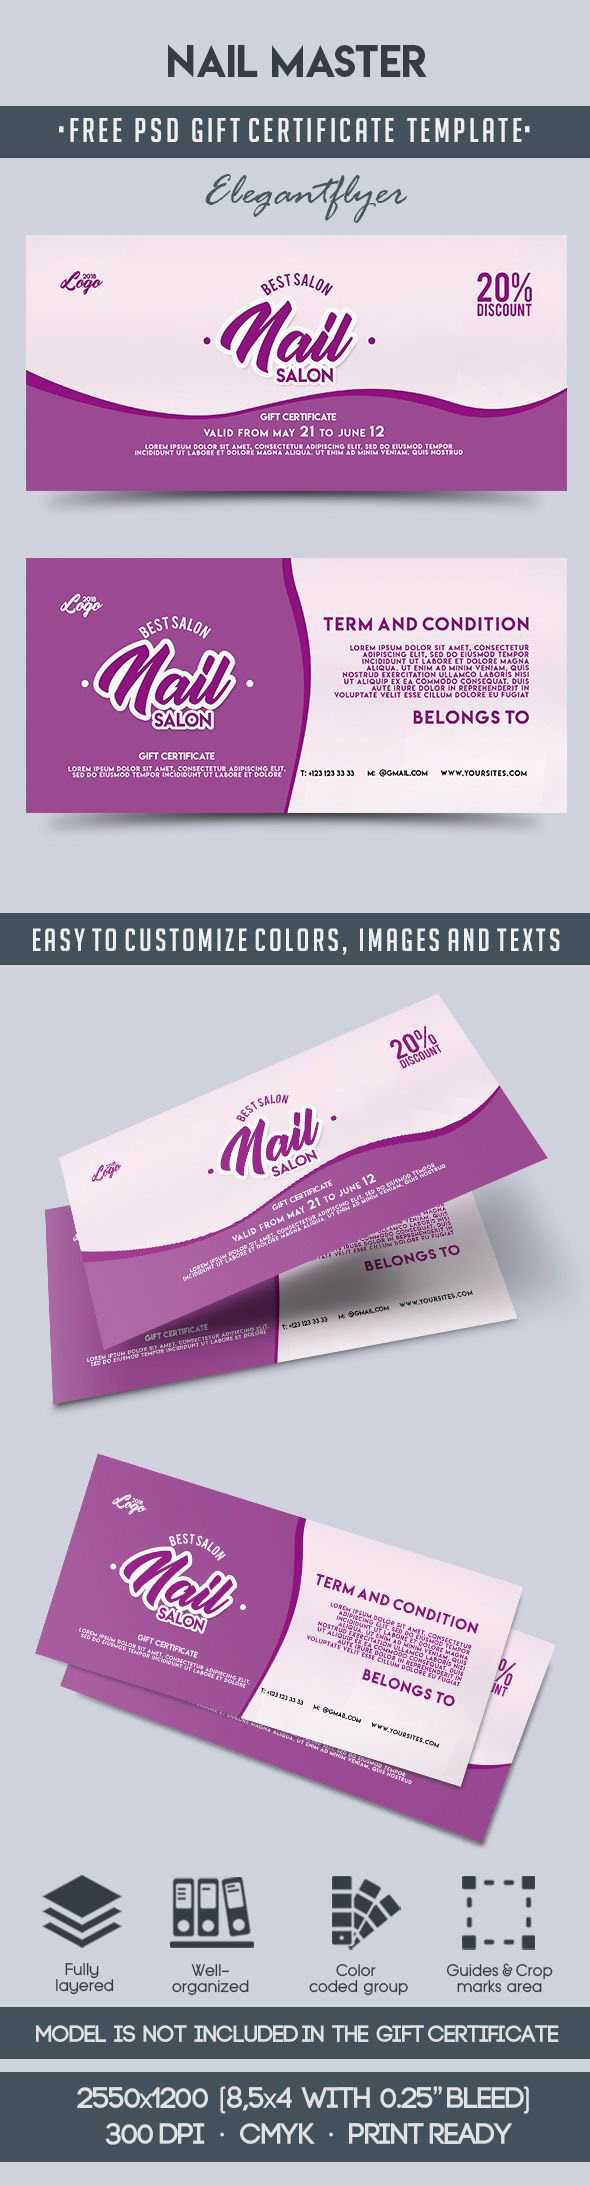 Nail Master – Free Gift Certificate Psd Template On Behance Inside Nail Gift Certificate Template Free